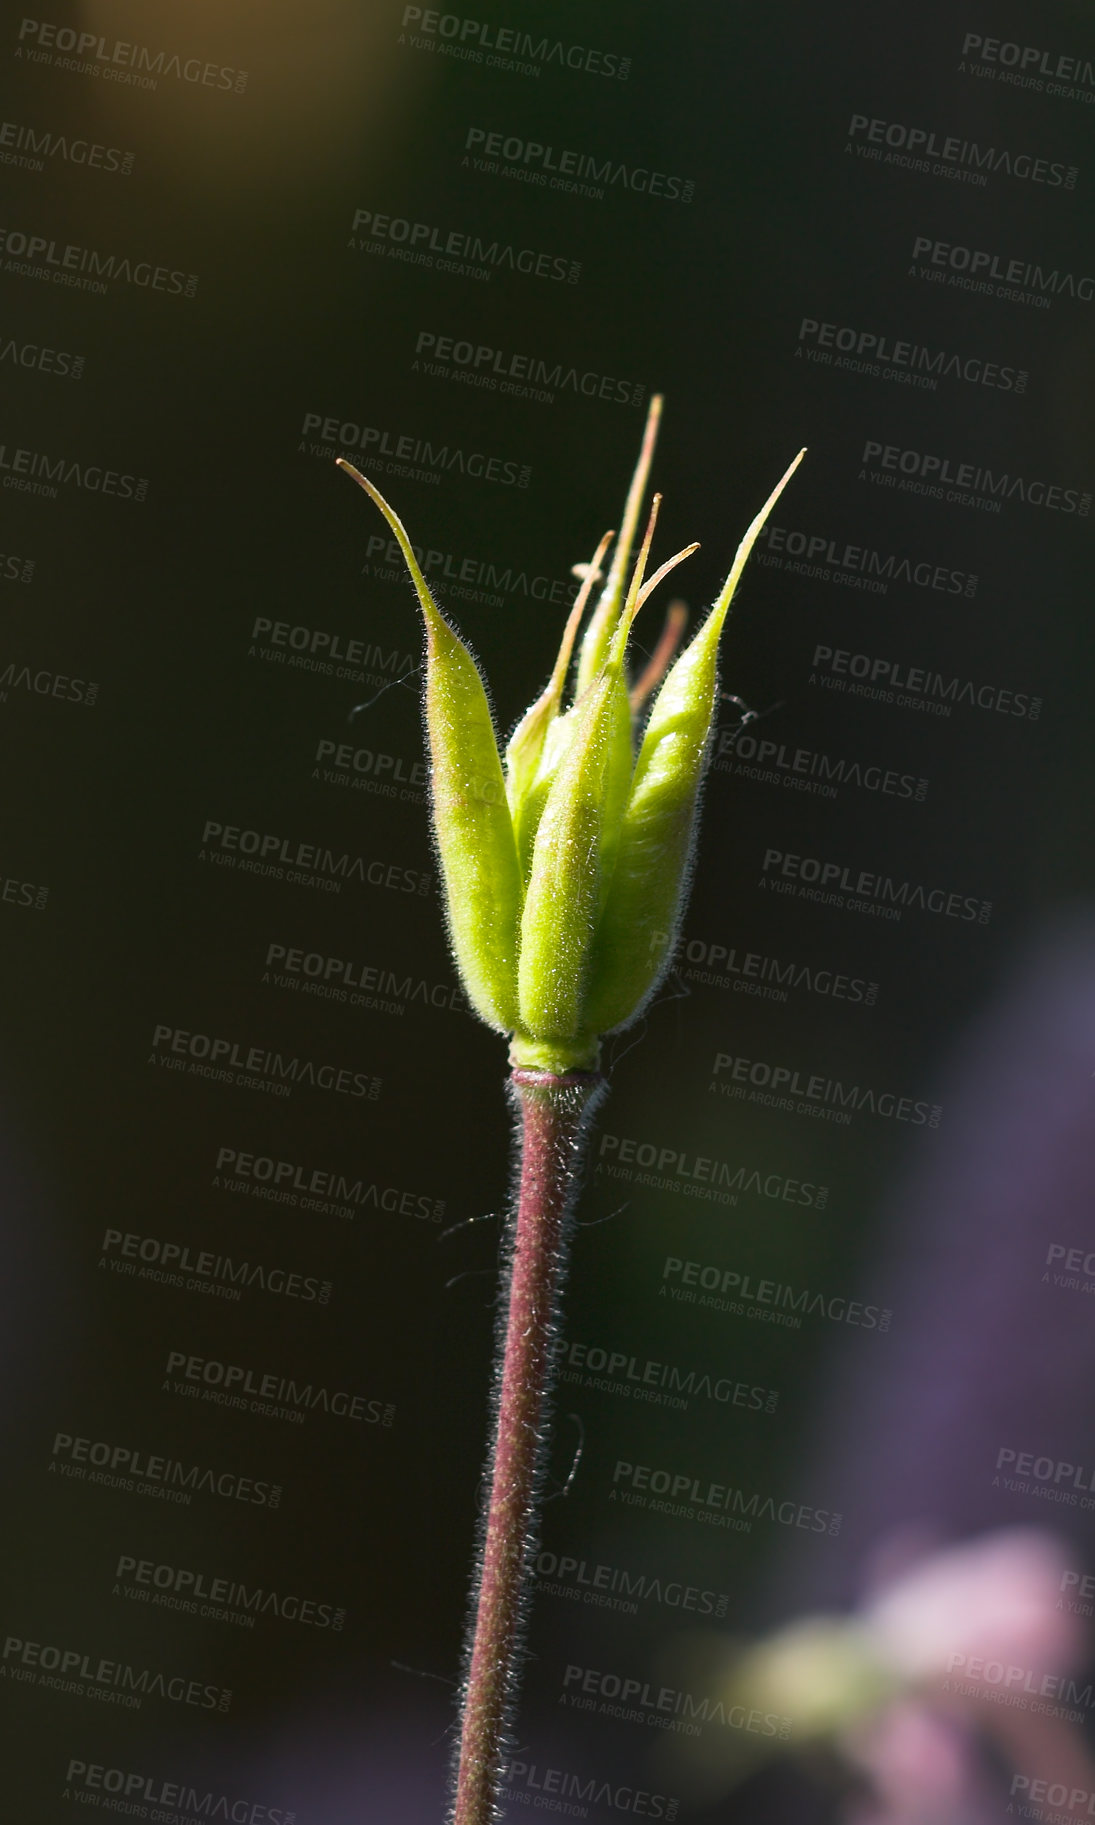 Buy stock photo A close-up photo of a bud